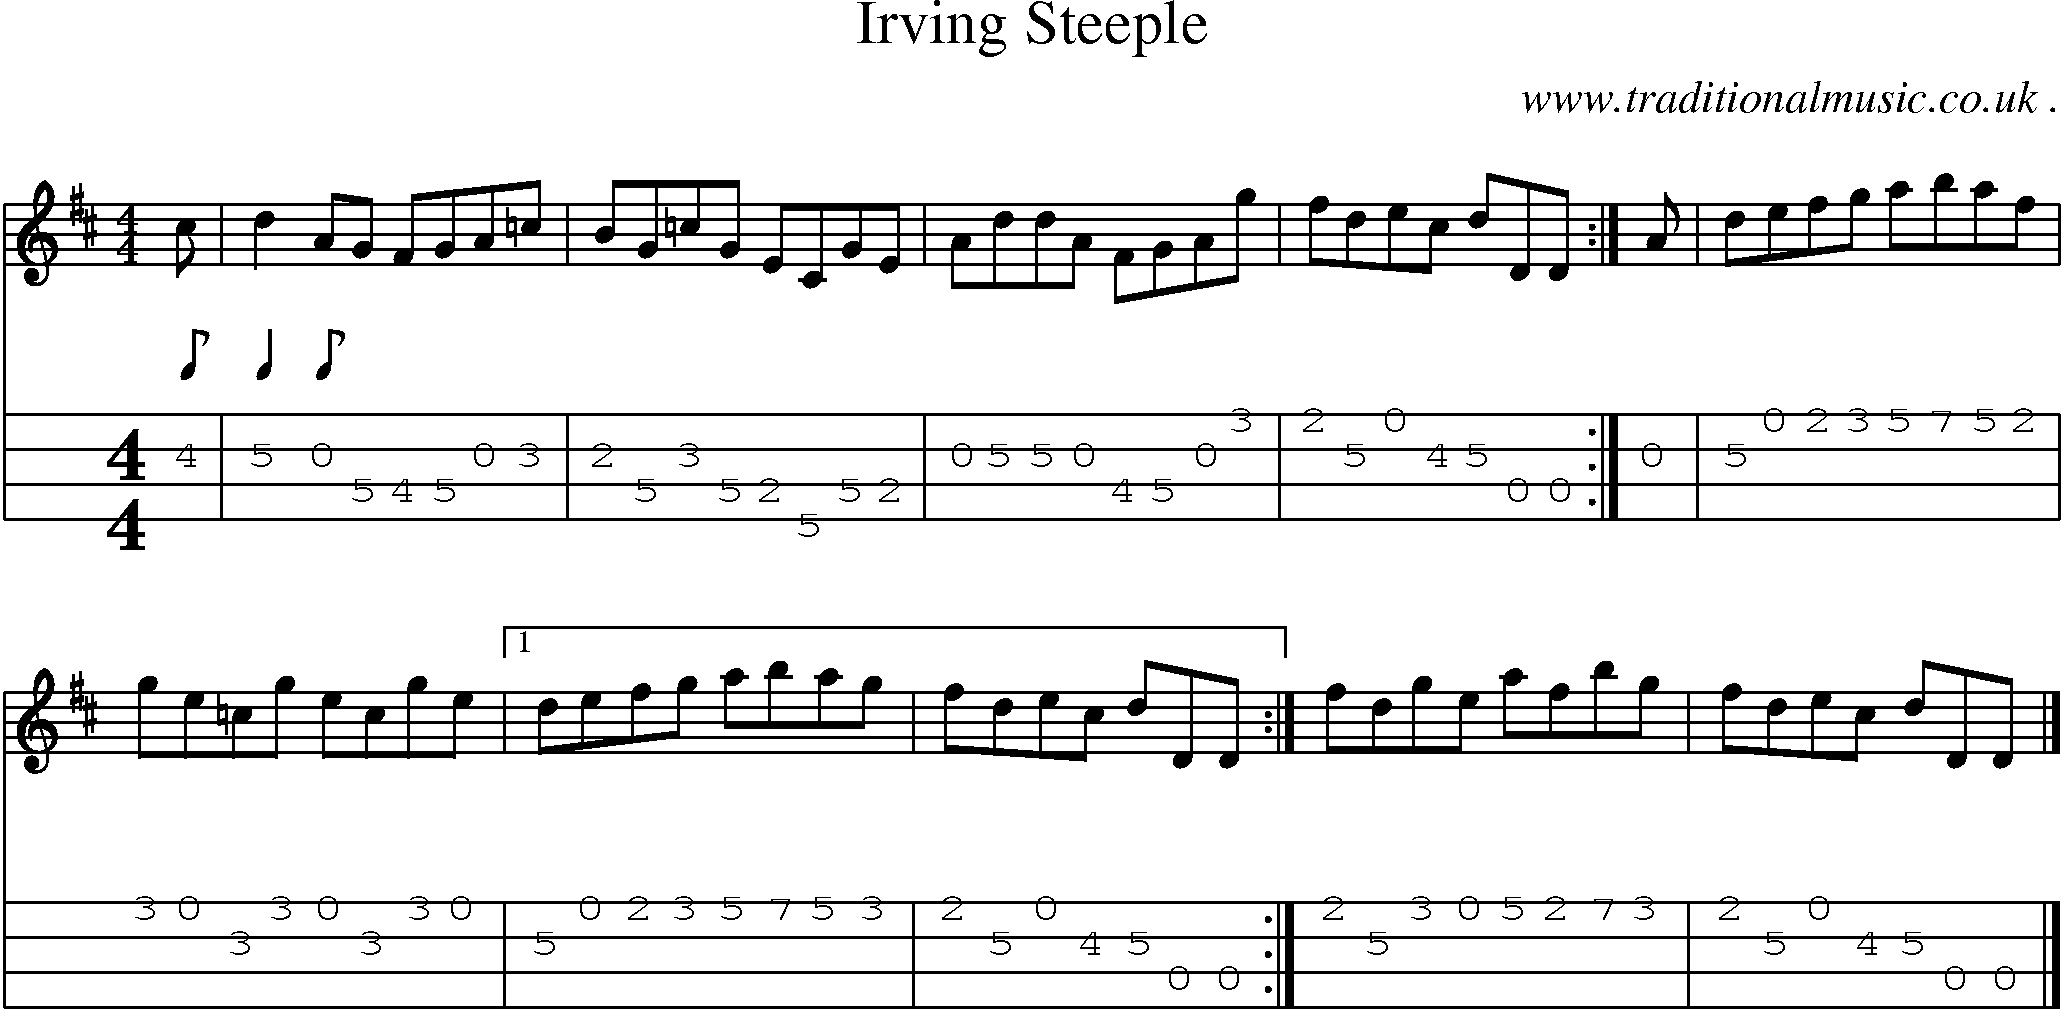 Sheet-music  score, Chords and Mandolin Tabs for Irving Steeple